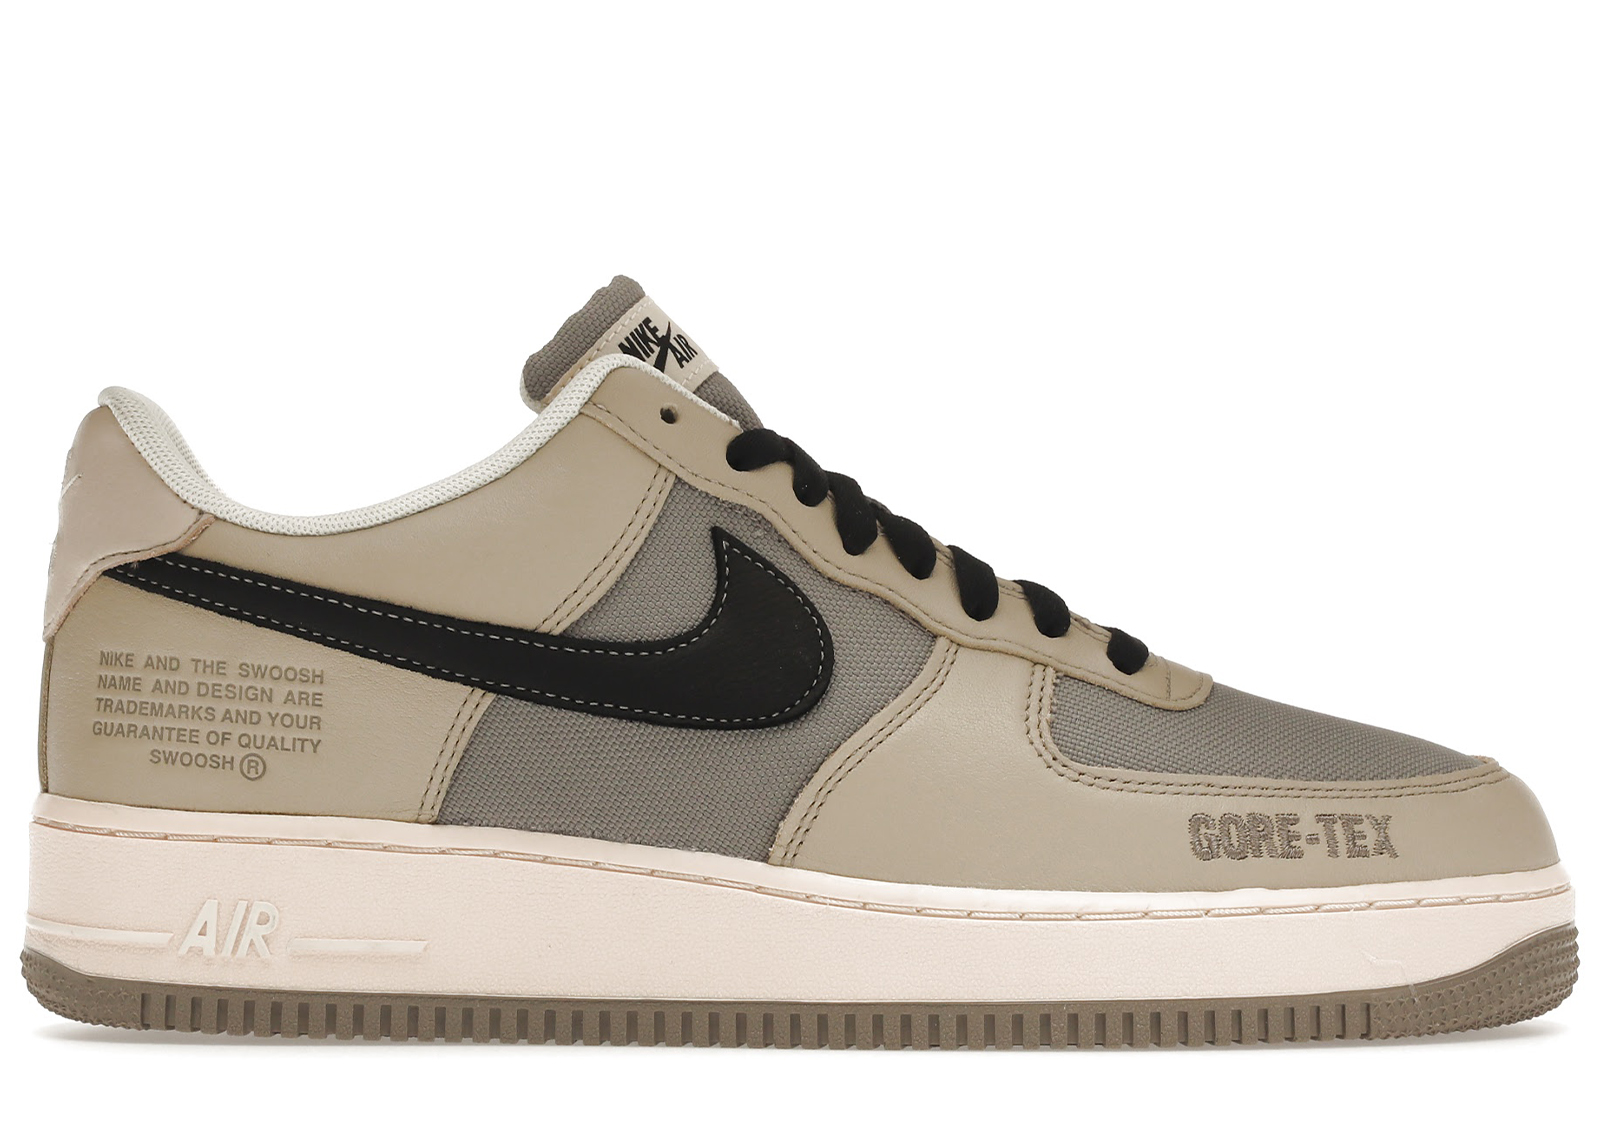 Nike Air Force 1 Low Gore-Tex Olive Black Men's - DO2760-206 - US